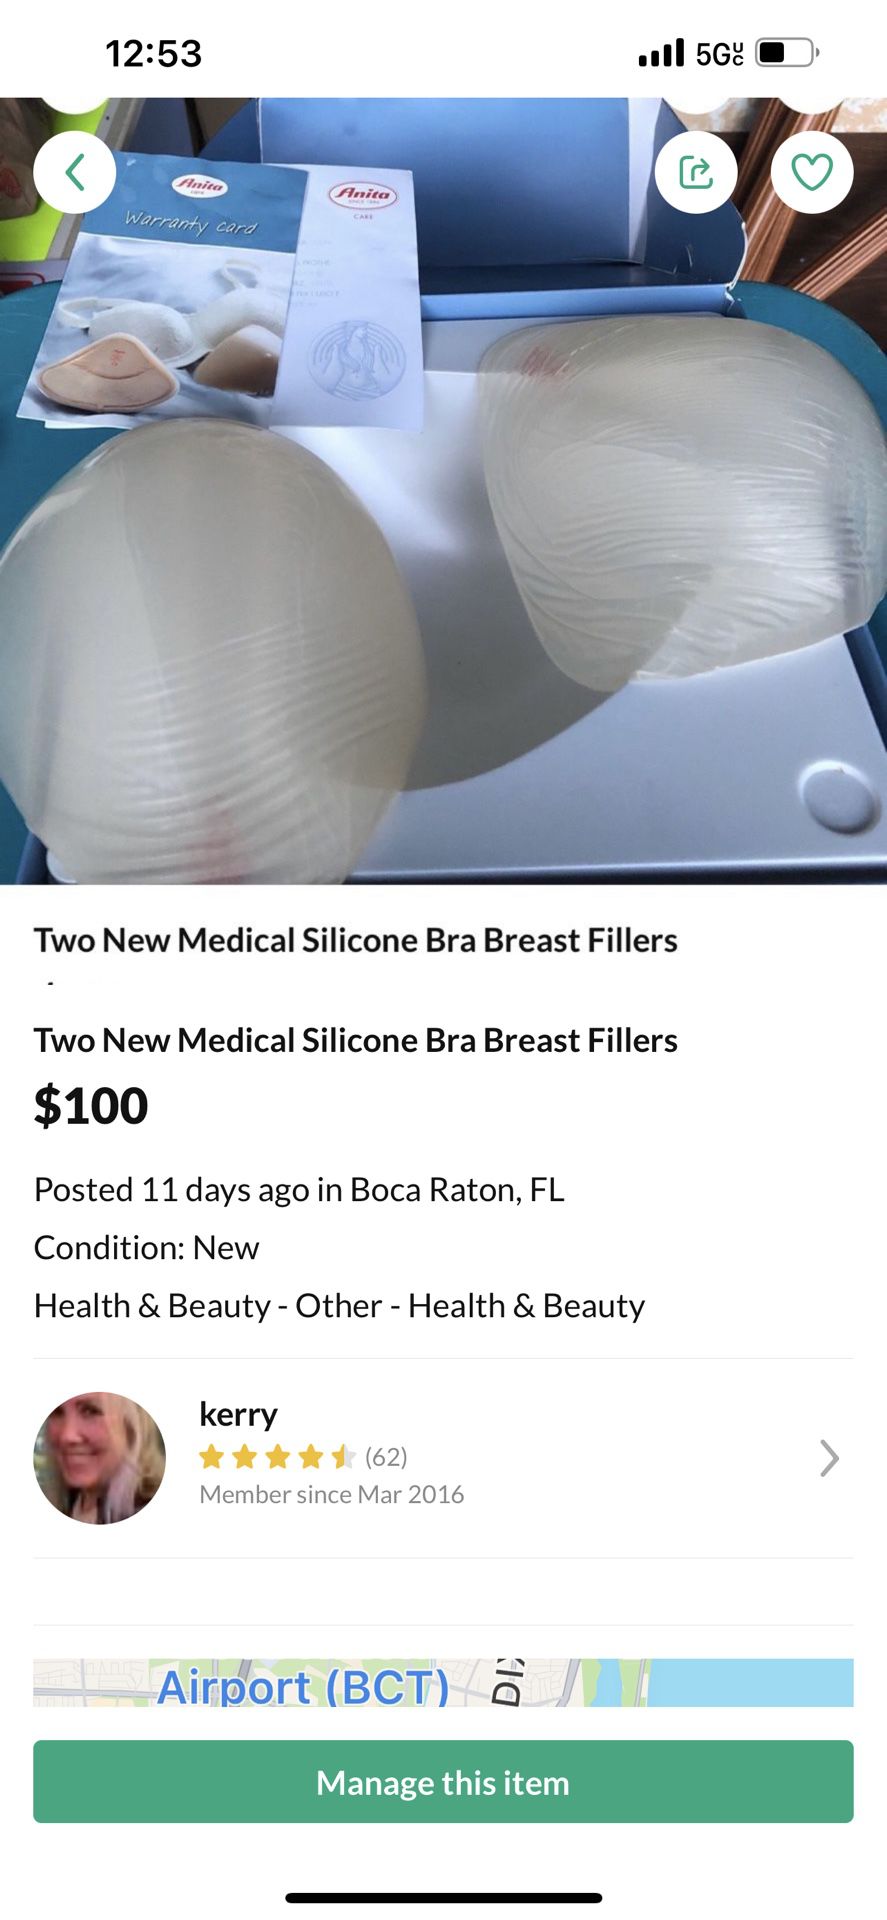 Two New Medical Silicone Bra Breast Fillers